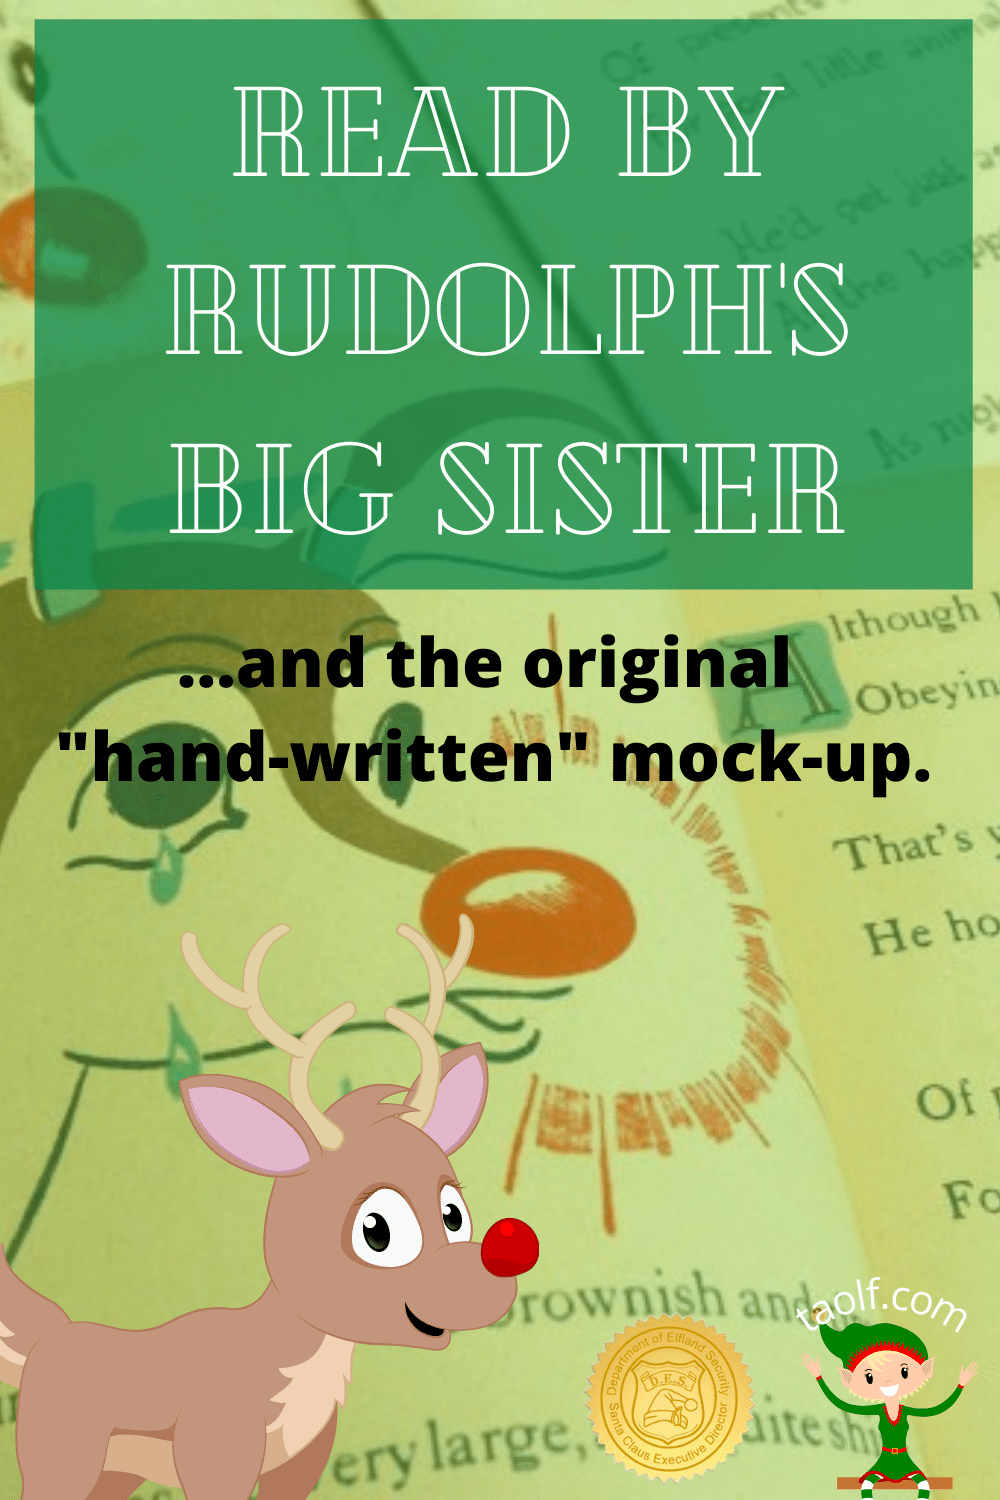 Rudolph's Sister and Original Booklet Mock-up